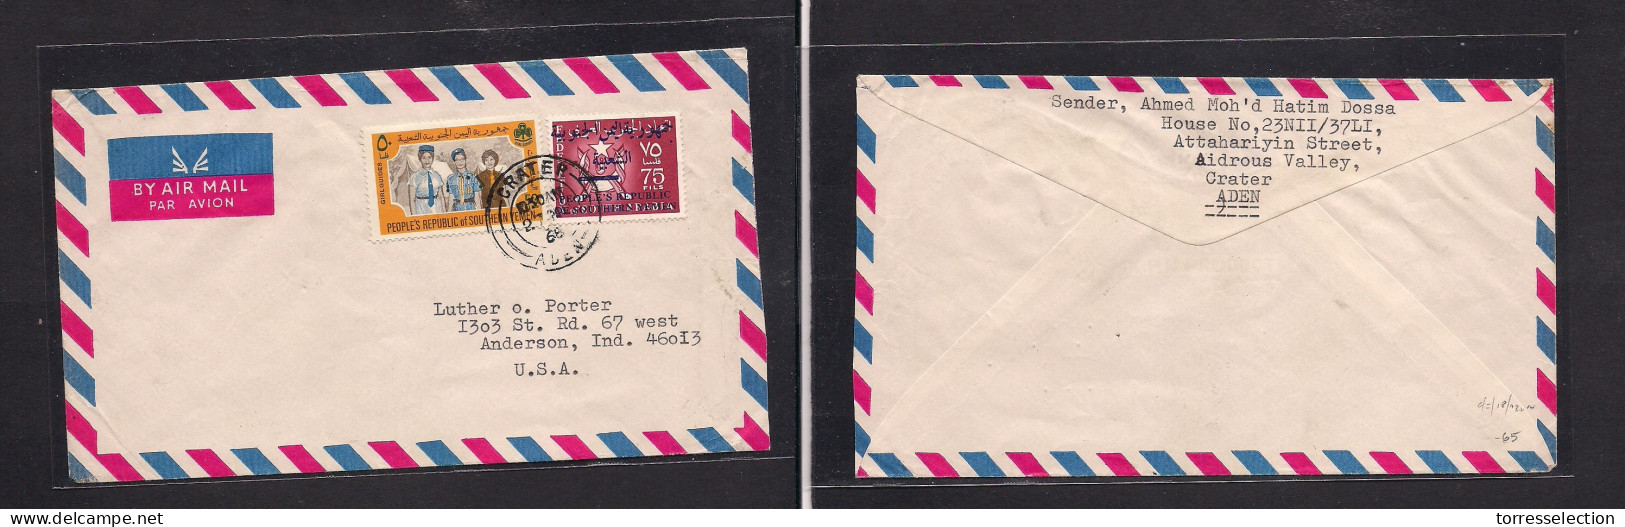 YEMEN. 1968 (27 Nov) South Yemen. Crater, Aden - USA, Anderson, Incl. Air Ovptd Multifkd Env Incl. Scout Issue. Scarce. - Yemen